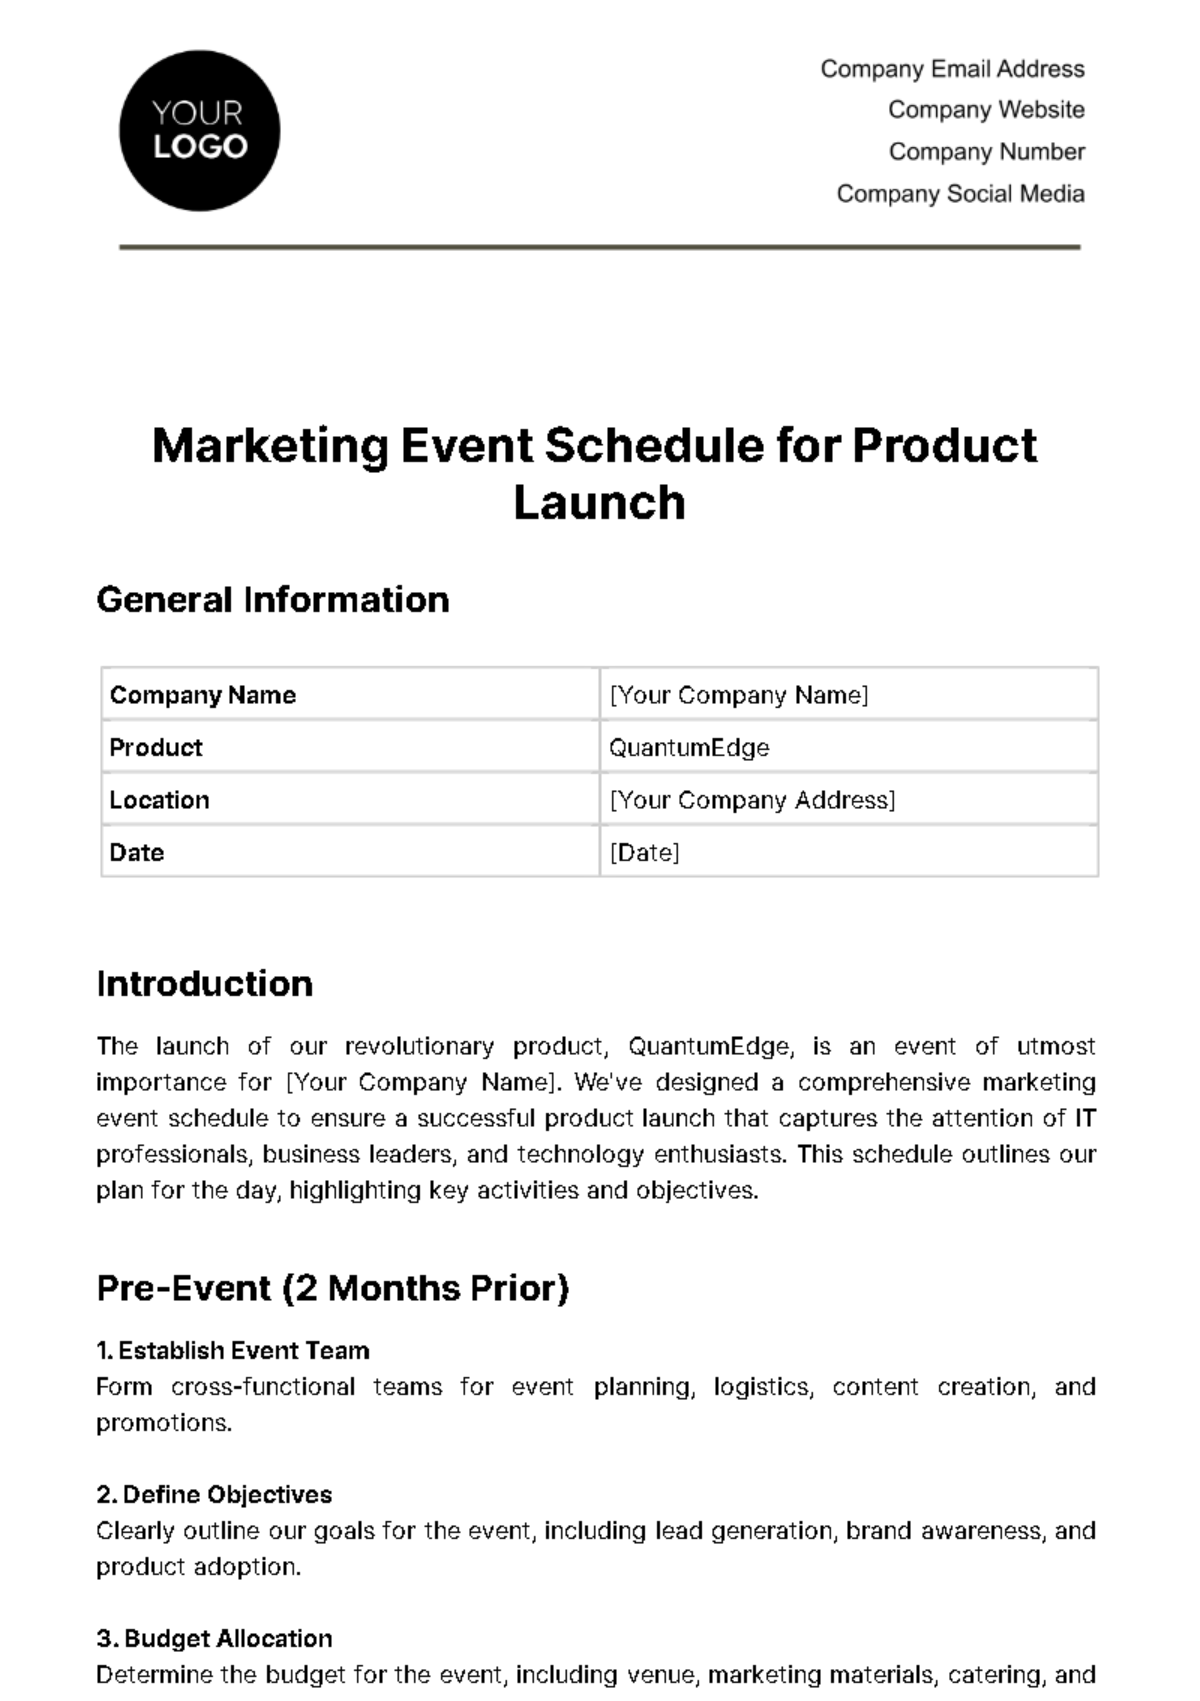 Marketing Event Schedule for Product Launch Template